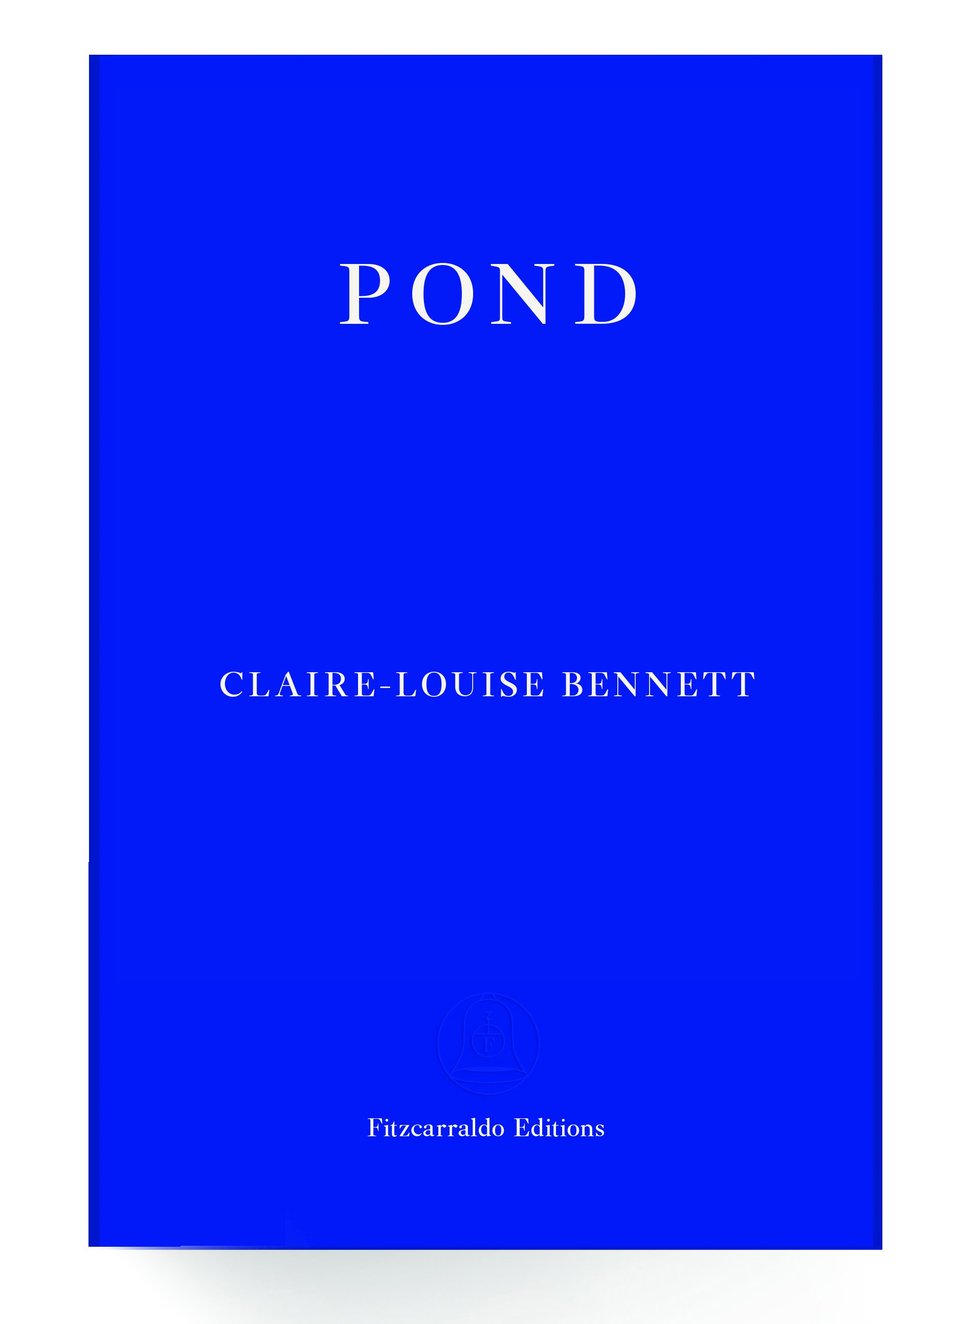 pond claire louise bennett review